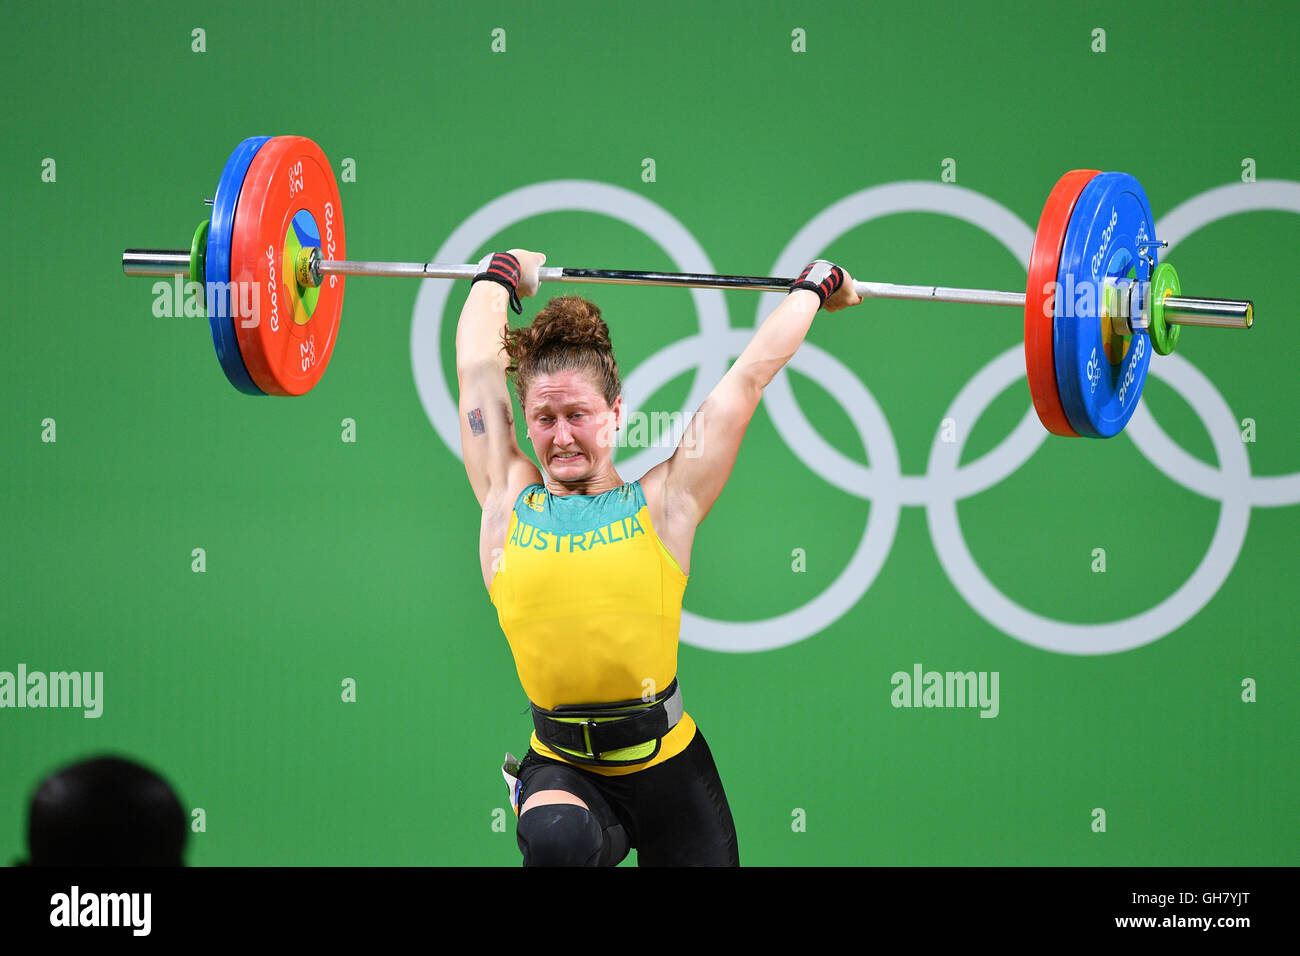 Rio De Janeiro, Brazil. 8th Aug, 2016. Tia-Clair Toomey of Australia fails  during the women's 58kg group B final of weightlifting competition at the  2016 Olympic Games, in Rio de Janeiro, Brazil